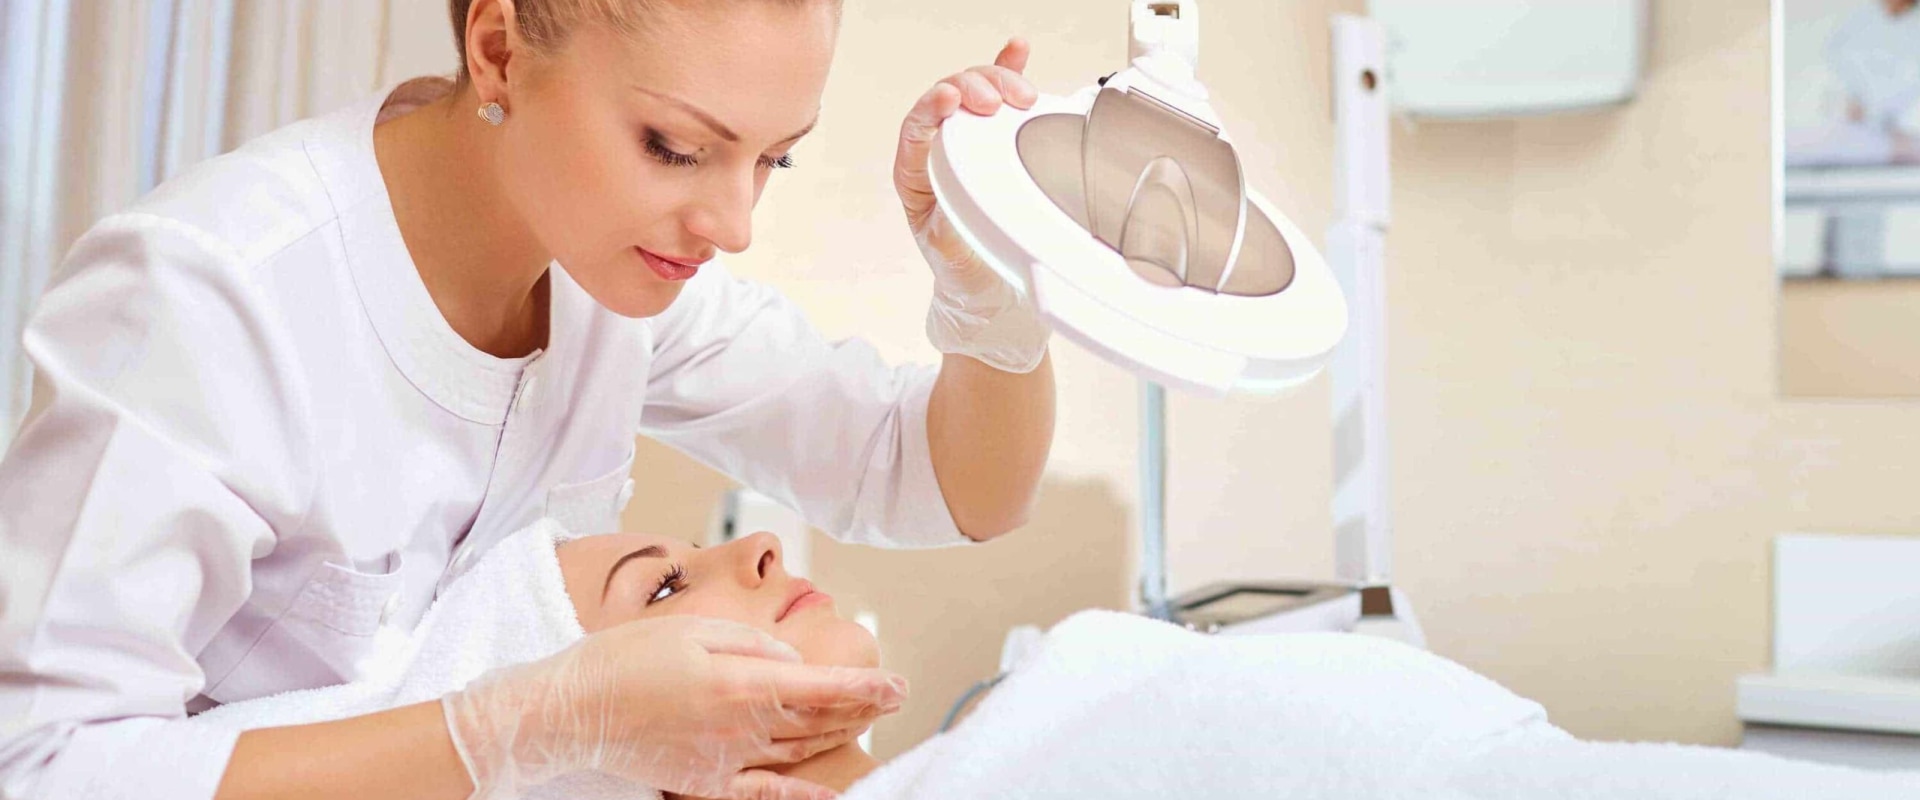 How profitable is a medical spa?